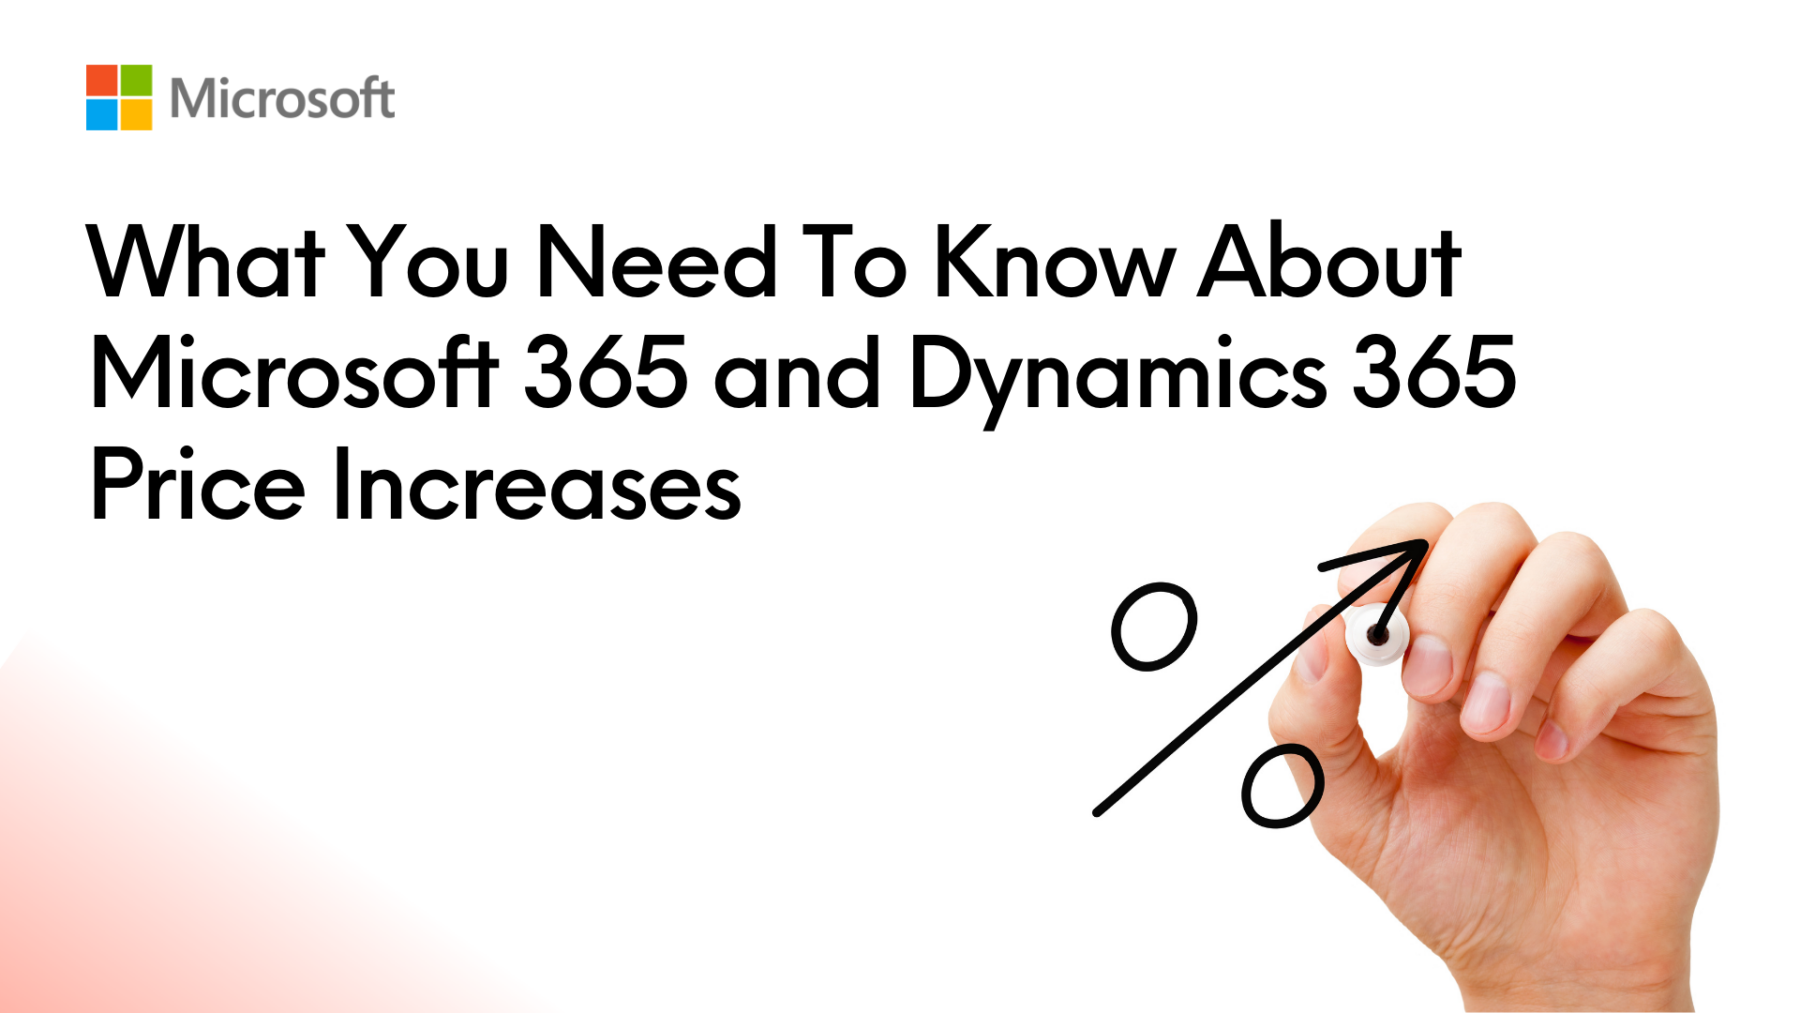 What You Need To Know About Microsoft 365 and Dynamics 365 Price Increases | March 2022